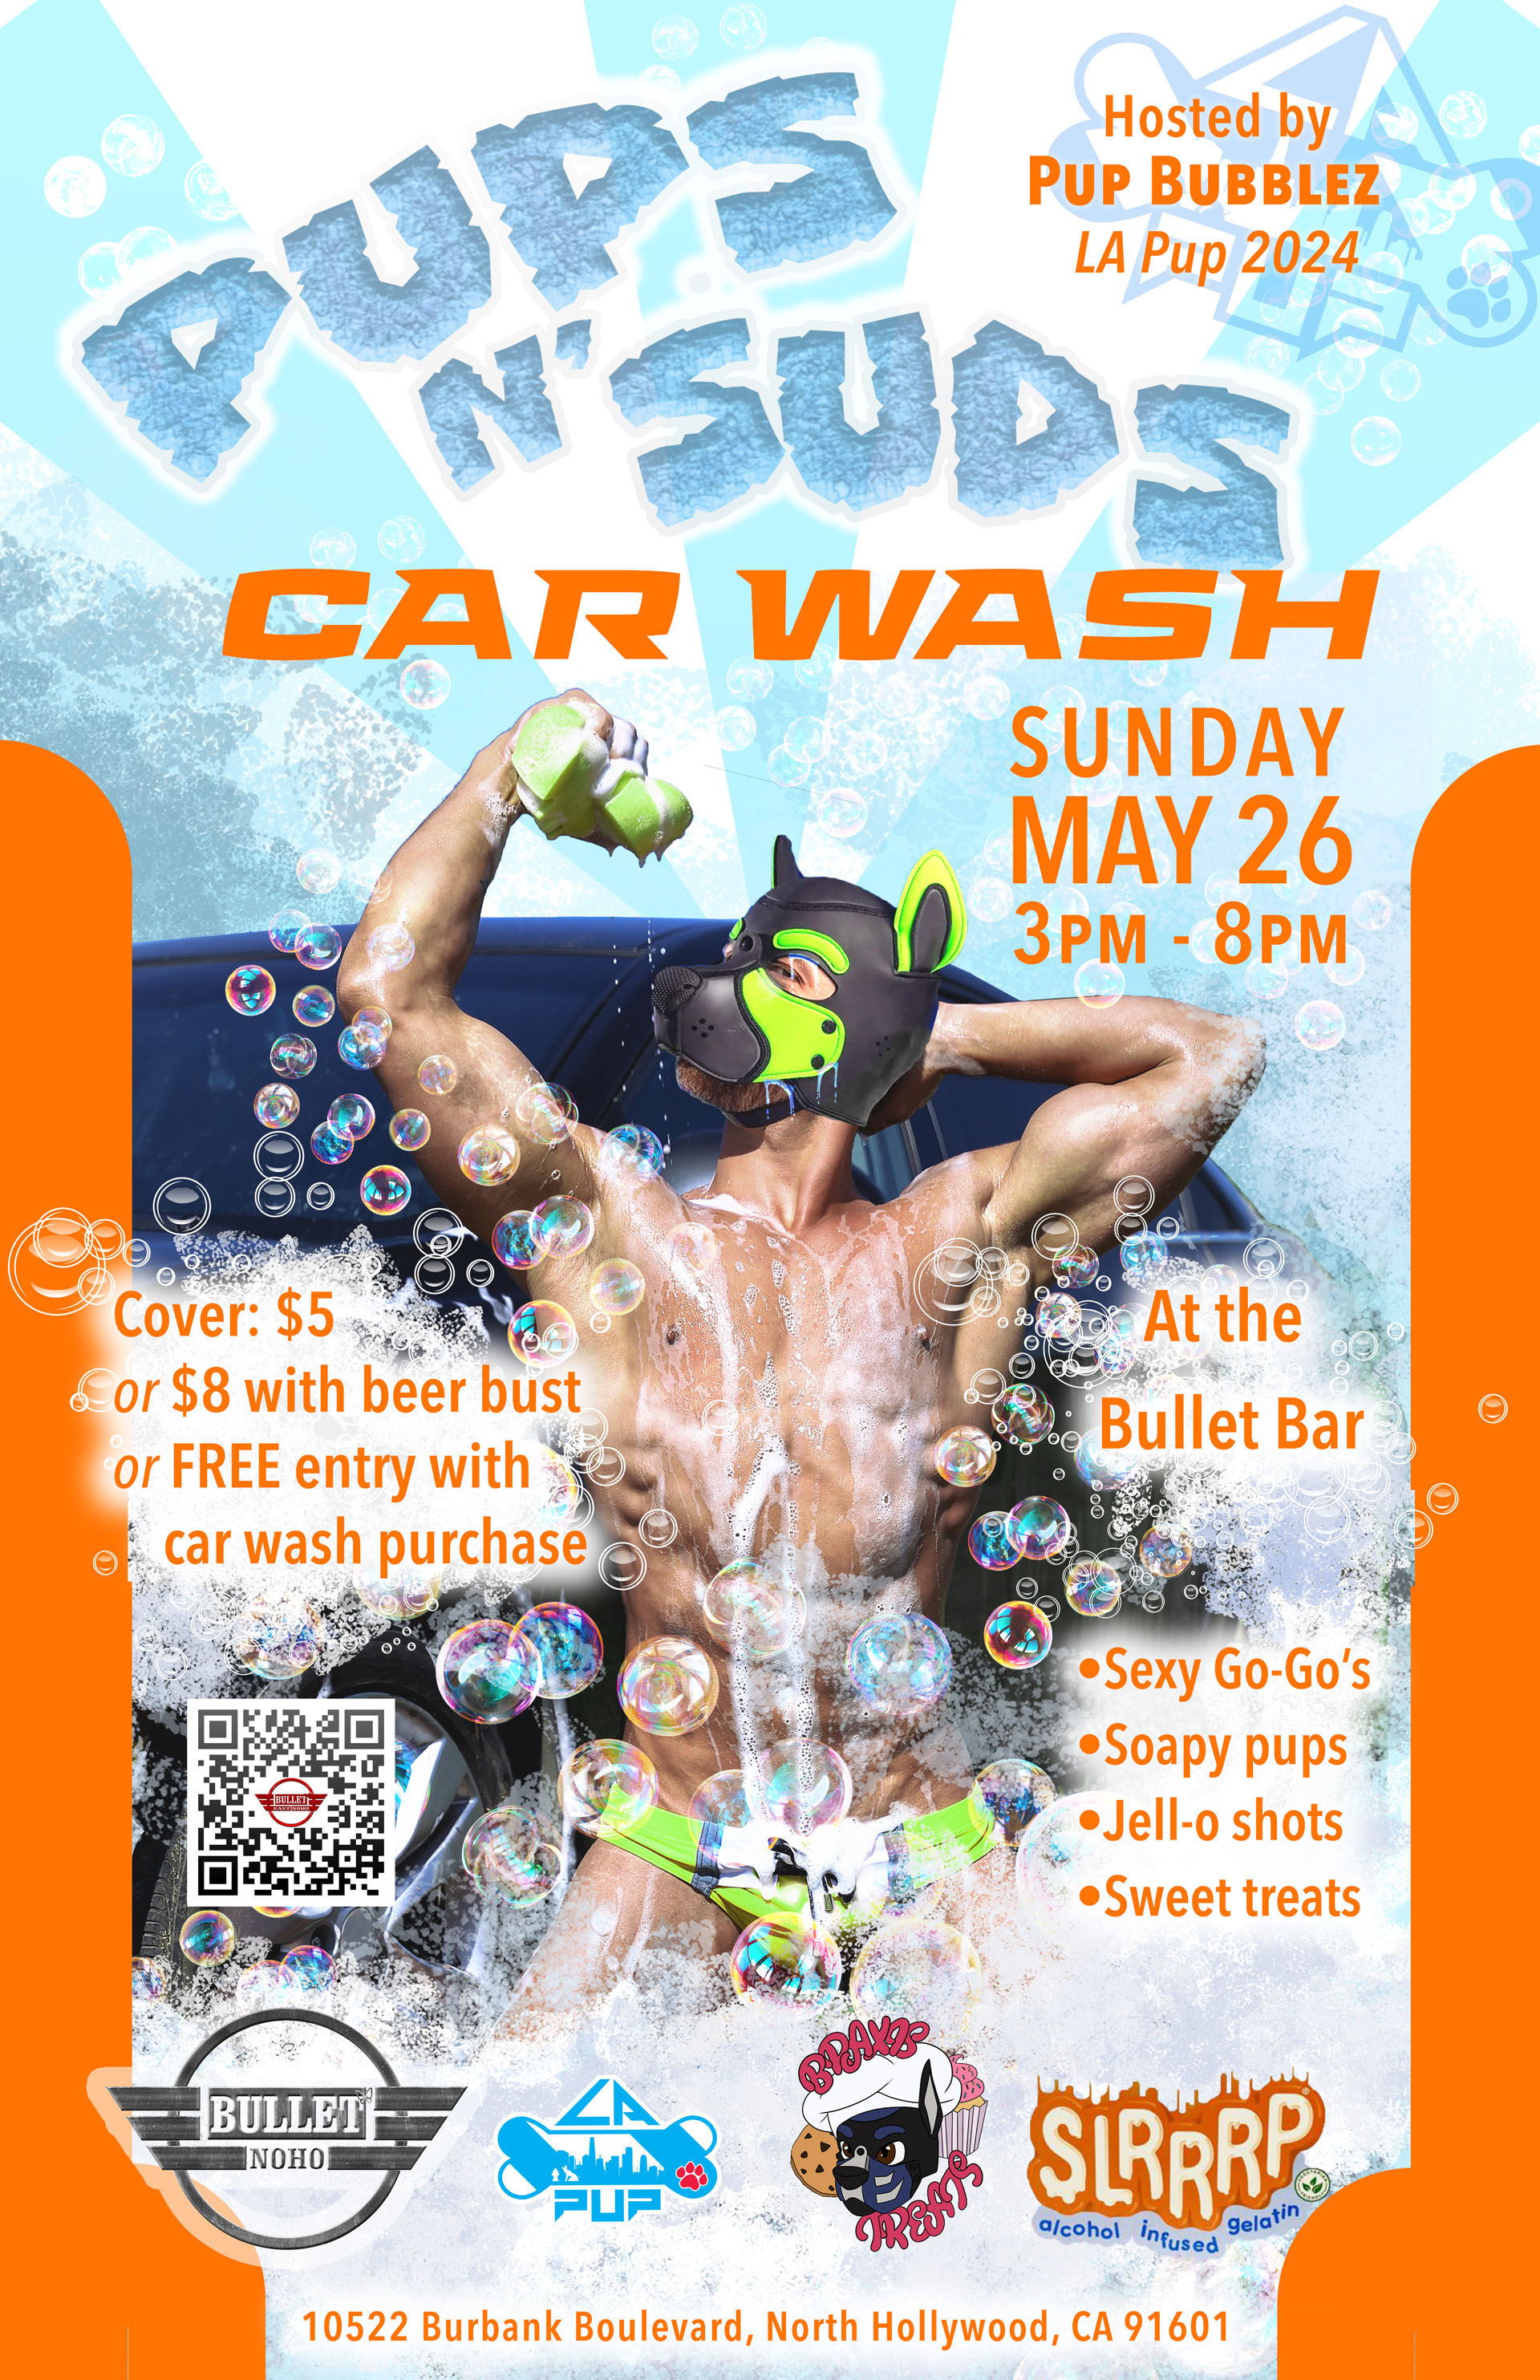 THE BULLET BAR and PUP BUBBLEZ Present PUPS N' SUDS CAR WASH: Sunday, 05/26/24 at 3:00 PM. Sexy GoGos! Soapy Pups! Jell-O Shots! Sweet treats! $5 cover, or $8+Beer Bust, or FREE entry with car wash purchase.